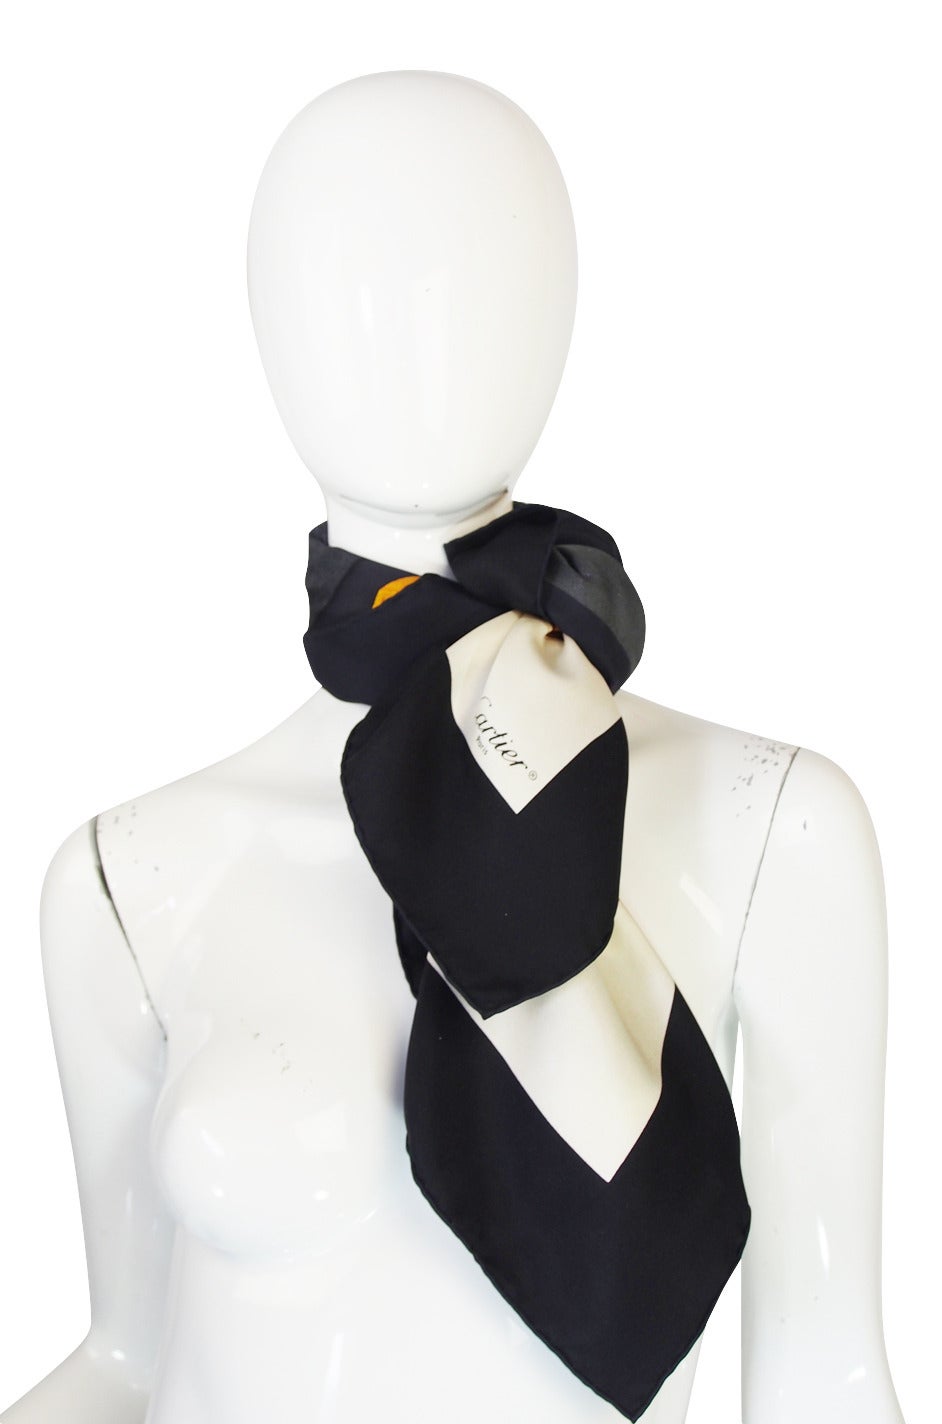 Beautiful silk twill Cartier scarf done with a classic print of the iconic Panthere cuff in alternating squares of black and white. The colors are bright and vibrant and it is quintessentially Cartier.

Appears to have been never been used or used